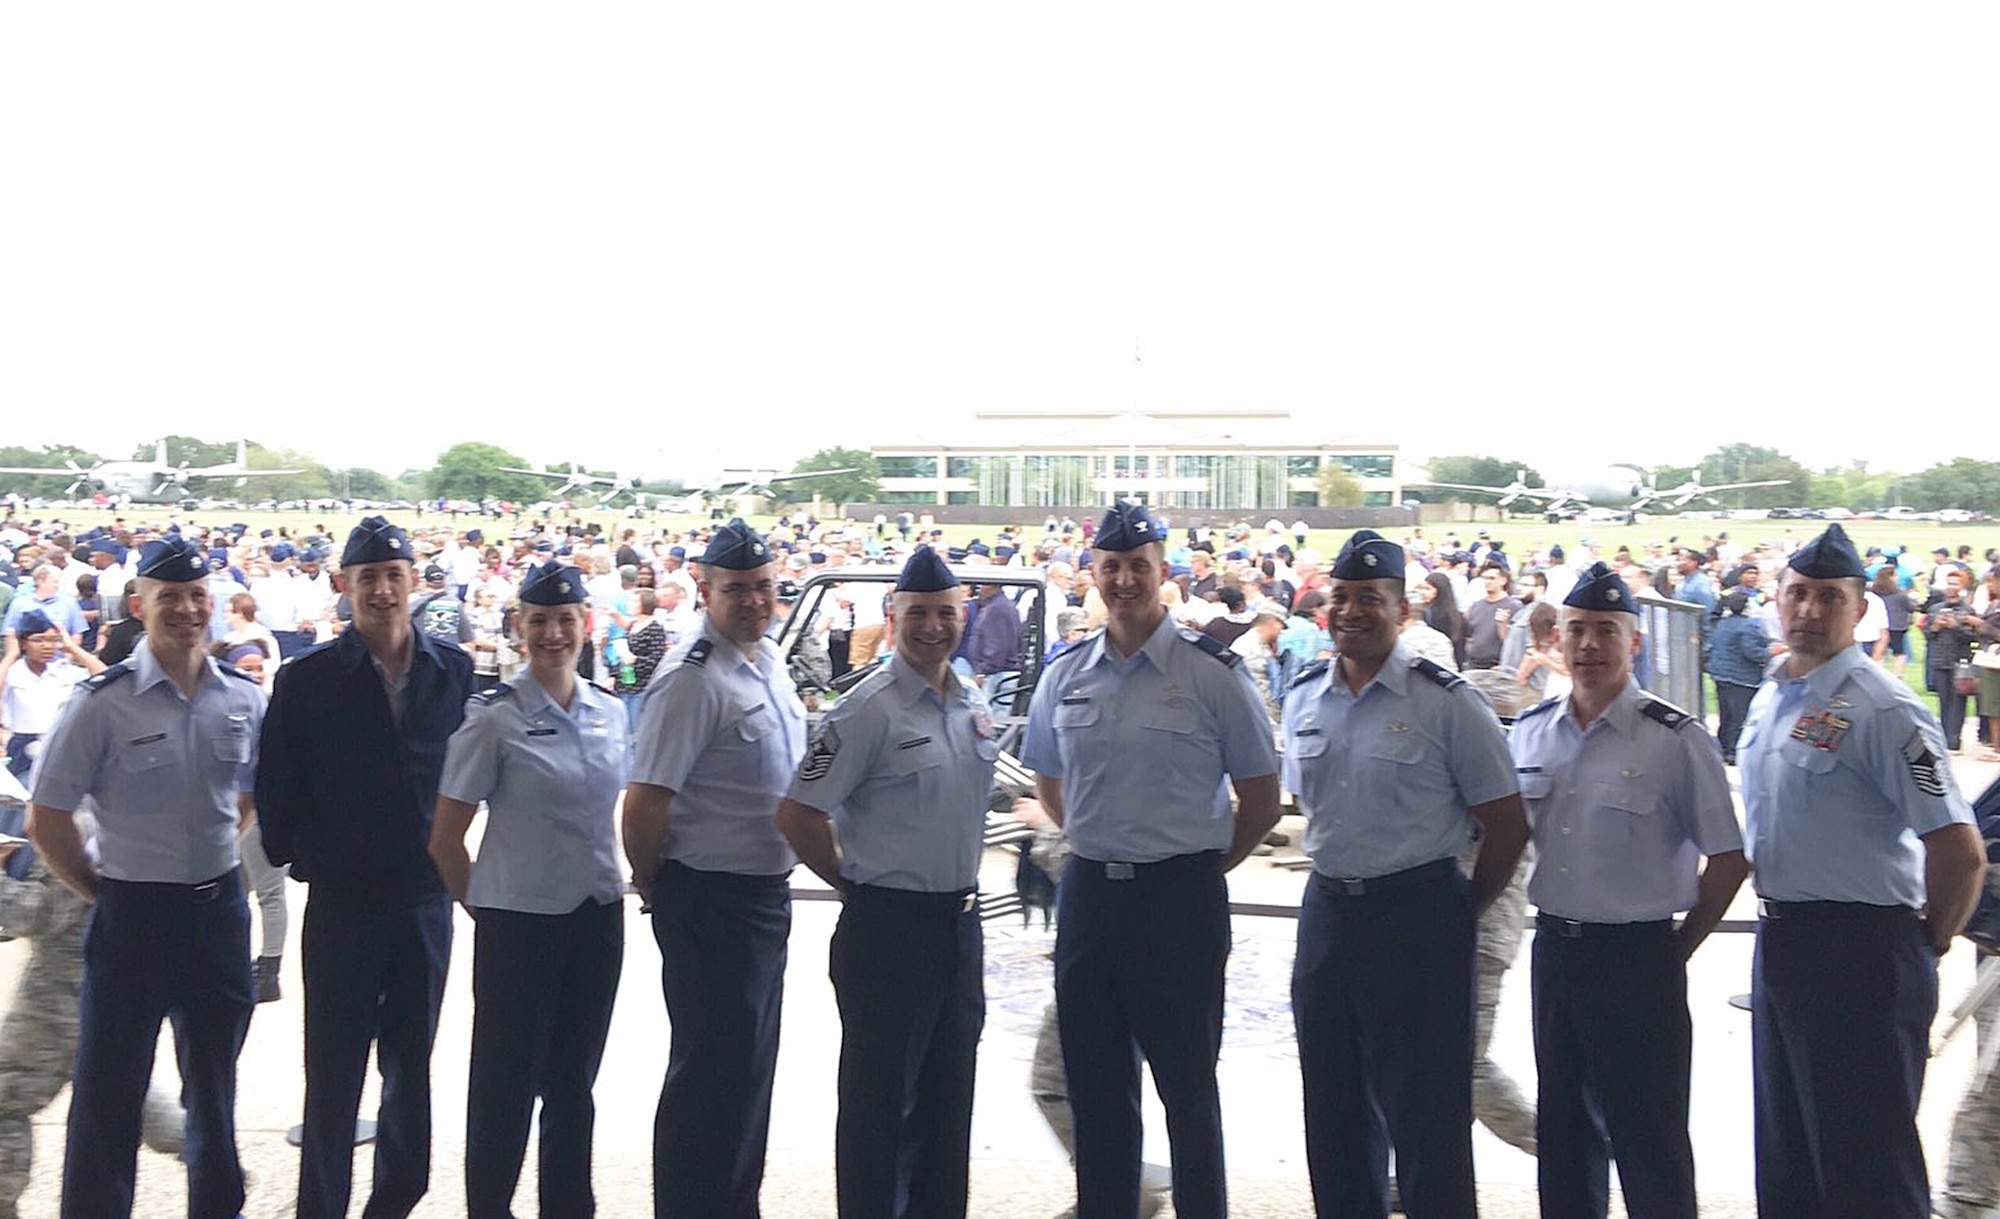 Col. Julian Cheater, 432nd Wing/432nd Air Expeditionary Wing commander, and select squadron commanders visited the United States Air Force graduating class of Basic Military Training Oct. 20, 2017, at Joint Base San Antonio, Texas. Leaders of the premier MQ-1 Predator and MQ-9 Reaper combat wing witnessed 700 trainees graduate to become the next generation of Airmen. (Courtesy Photo)